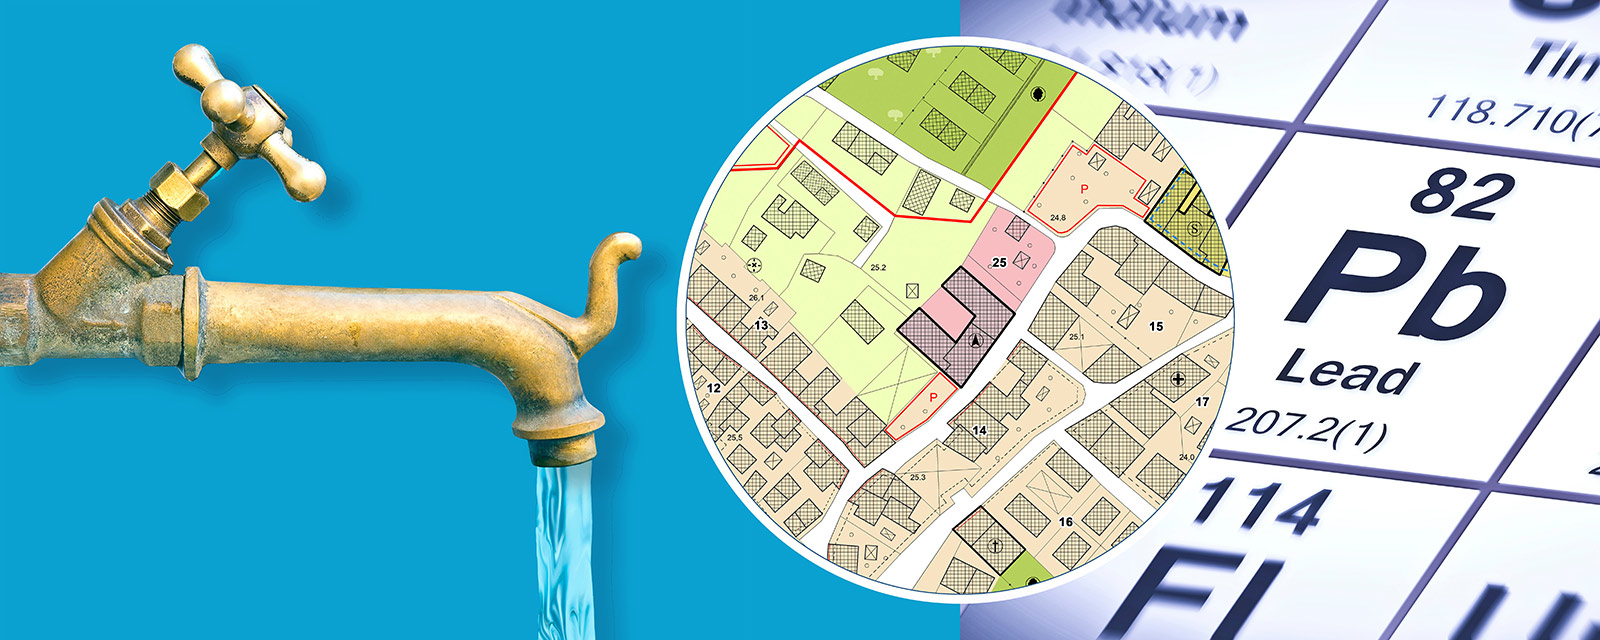 Infographic of tap with running water, street map and the element lead in the periodic table